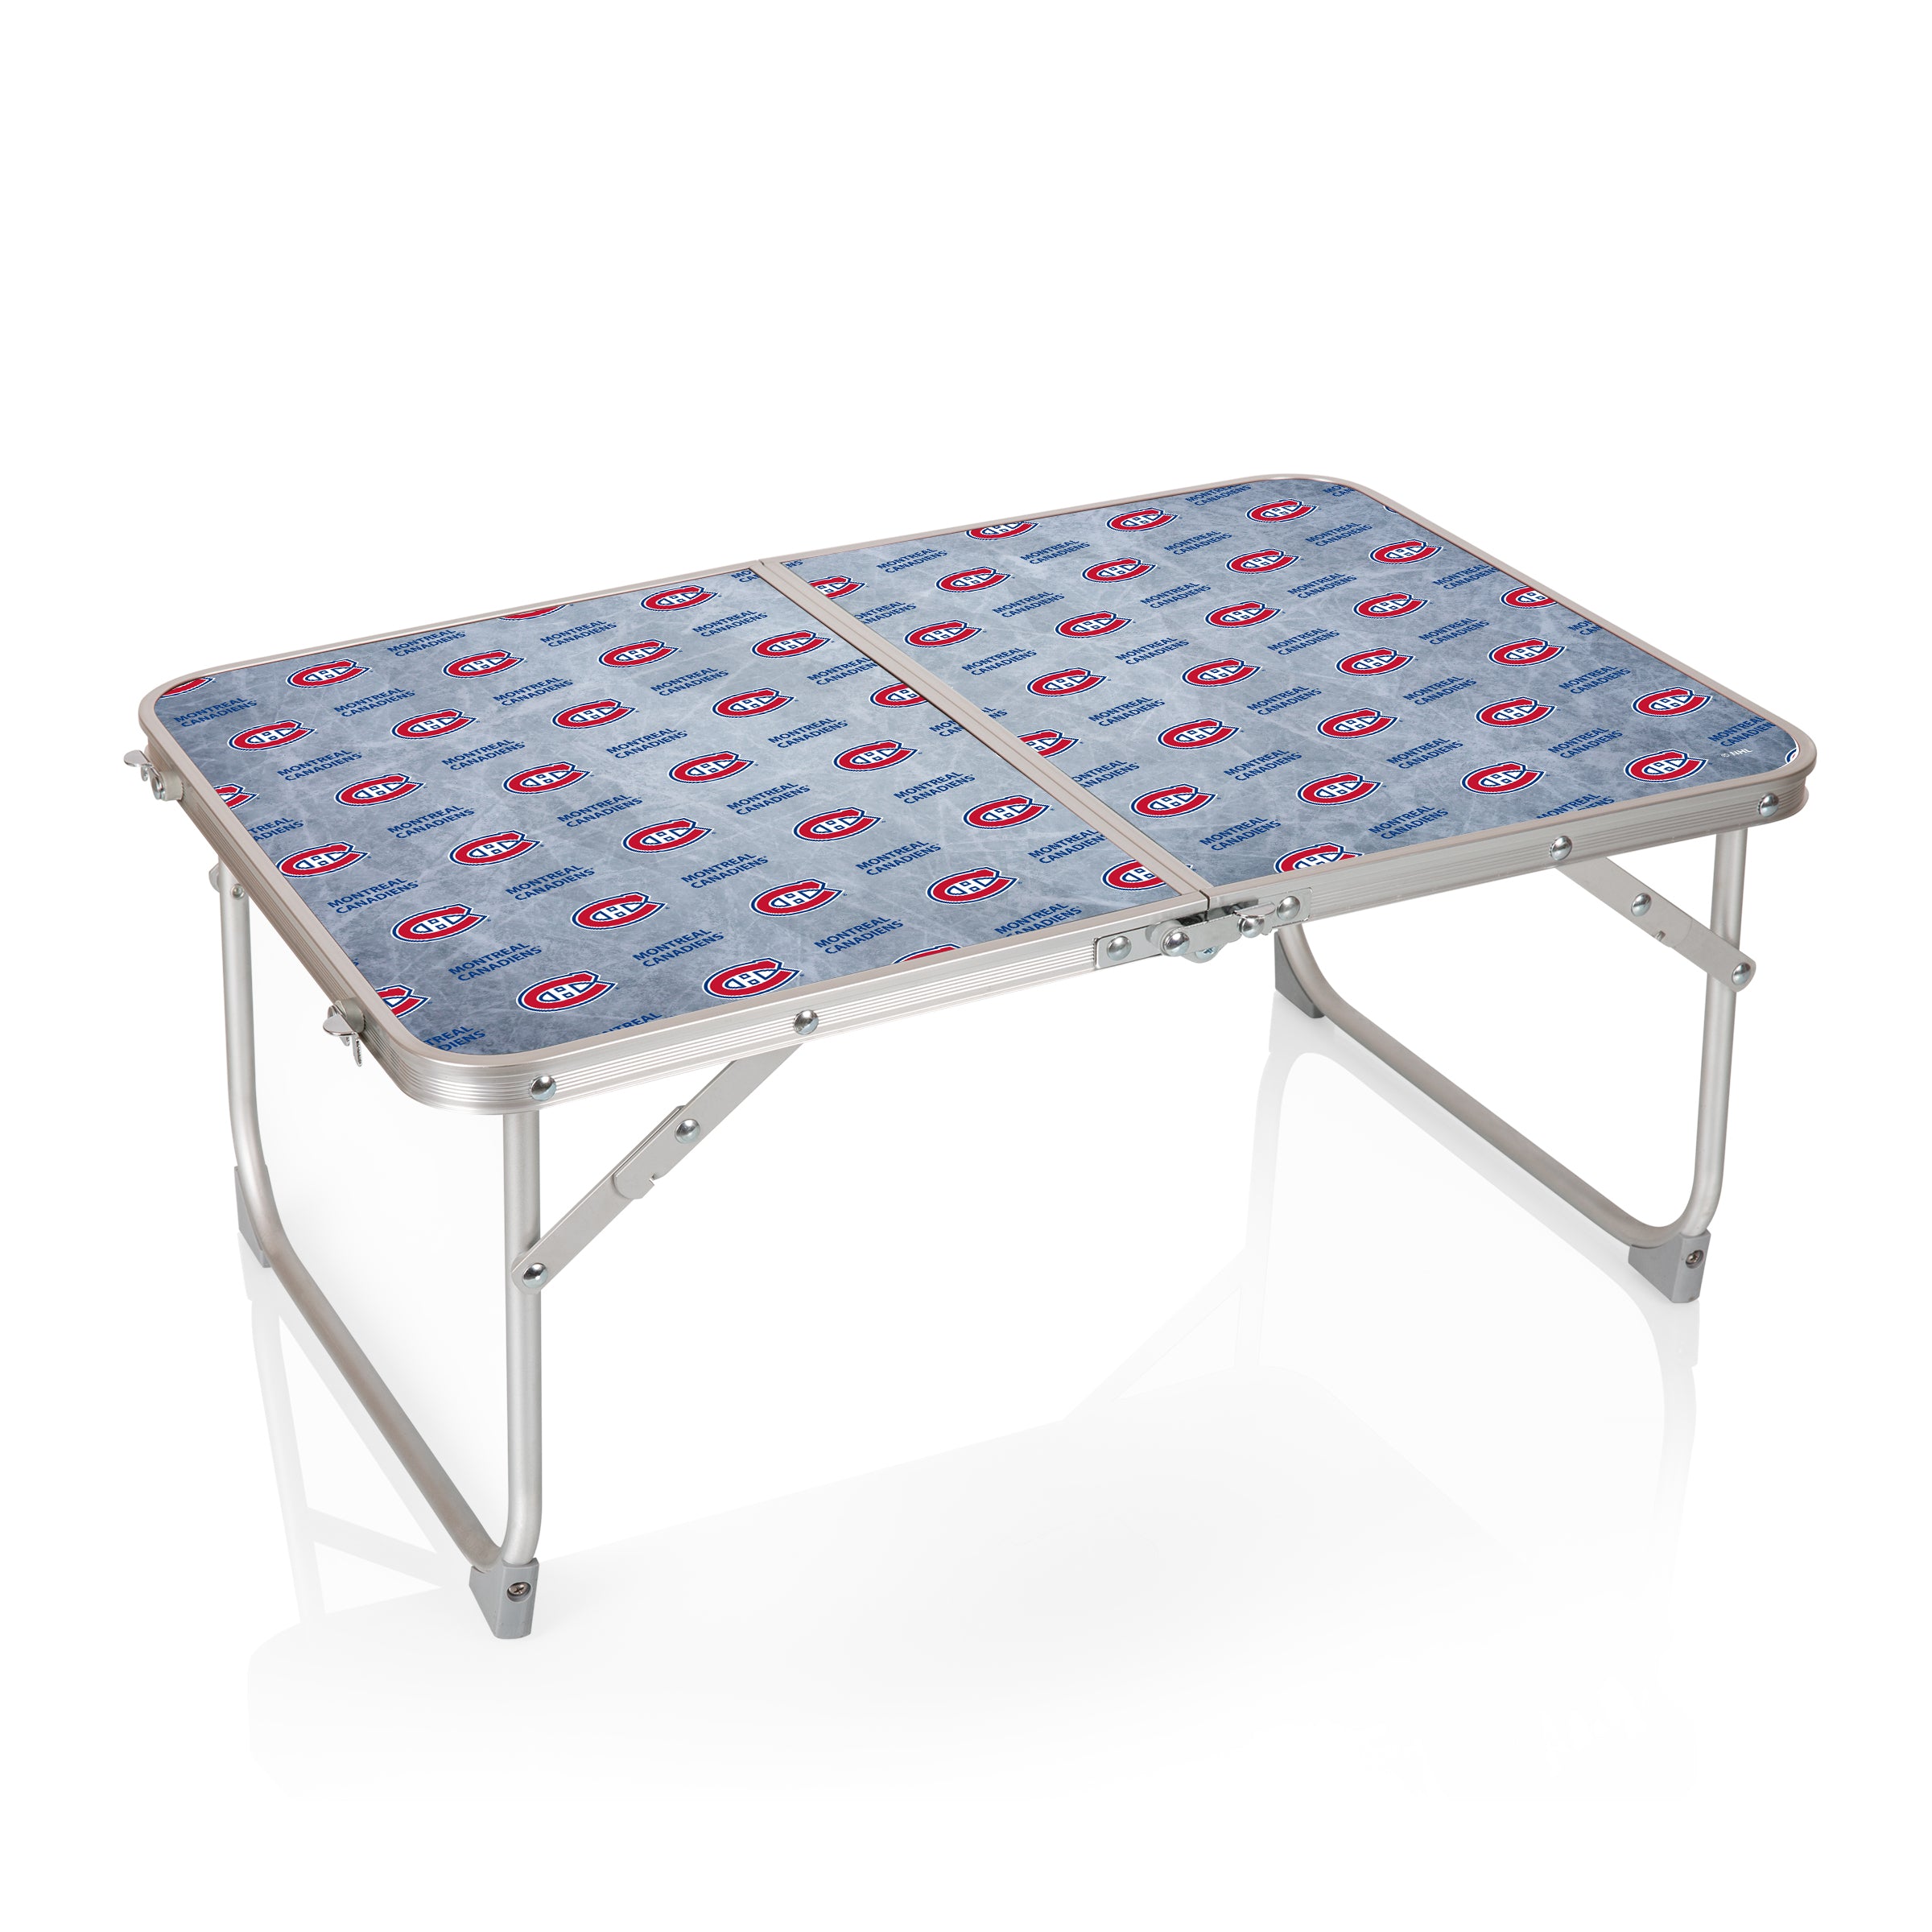 Montreal Canadiens - Concert Table Mini Portable Table